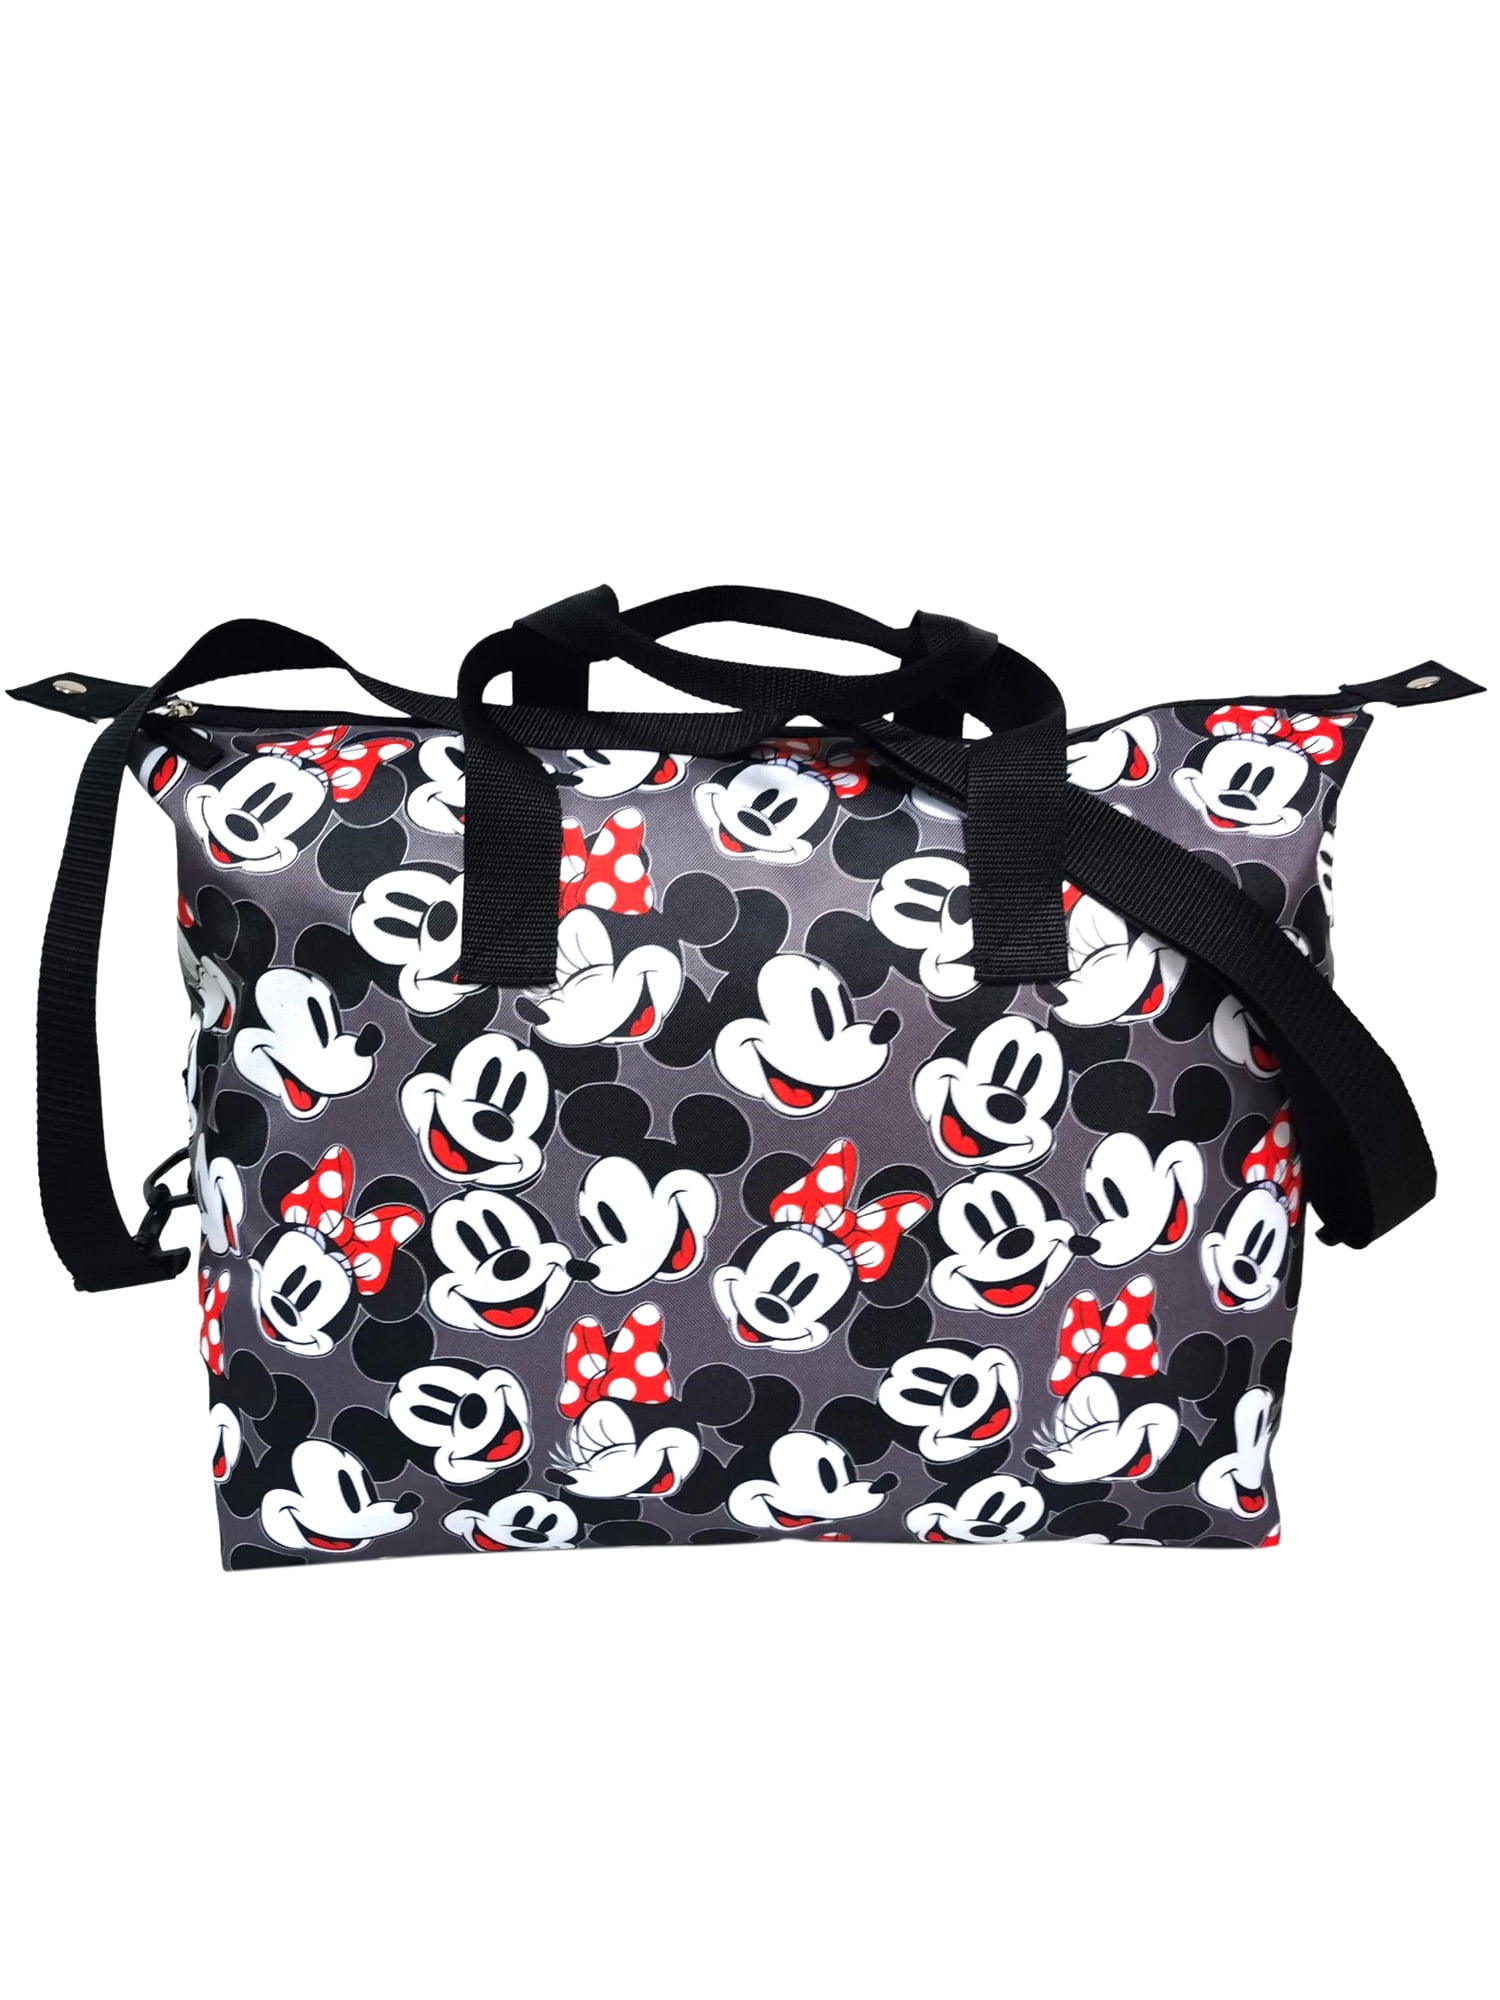 Disney Mickey New Fashion Women's Travel Tote Bag Men's and Women's Luggage  Bag Large Capacity One-shoulder Messenger Bag